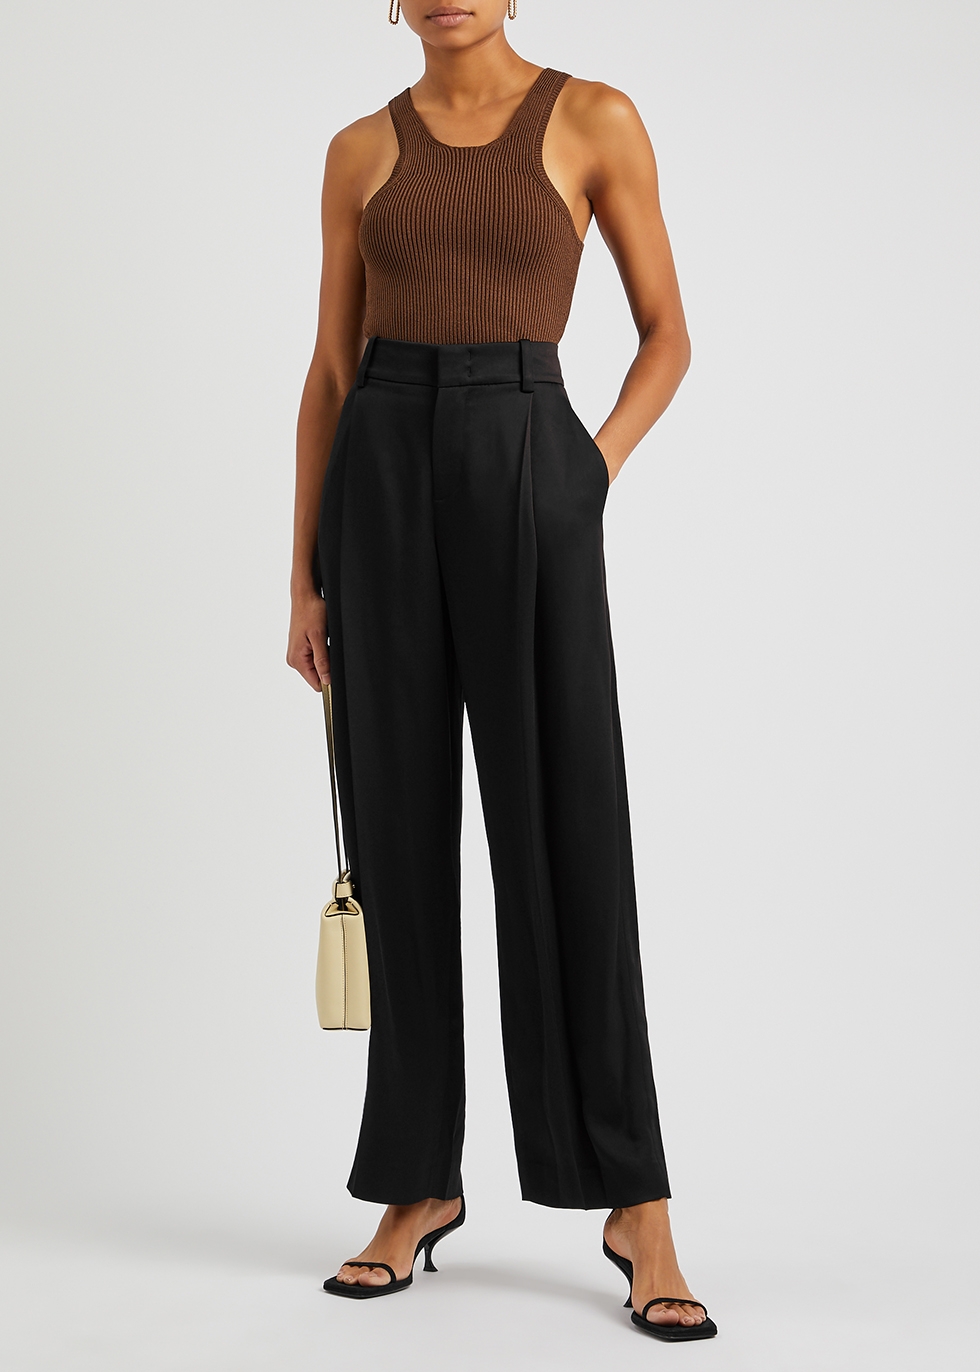 Womens Clothing Trousers Save 1% Vince Crushed Satin Pant in Black Slacks and Chinos Straight-leg trousers 